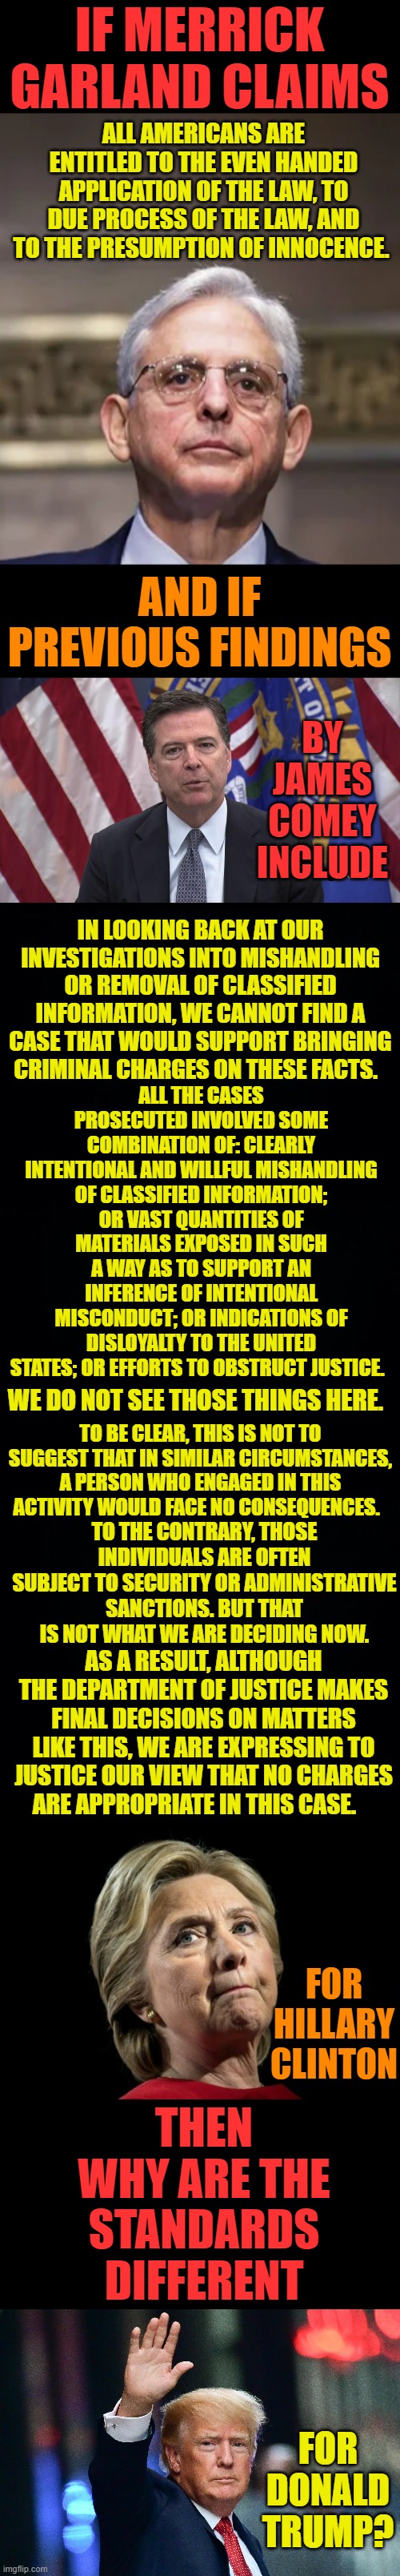 The Real Question | IF MERRICK GARLAND CLAIMS; ALL AMERICANS ARE ENTITLED TO THE EVEN HANDED APPLICATION OF THE LAW, TO DUE PROCESS OF THE LAW, AND TO THE PRESUMPTION OF INNOCENCE. AND IF PREVIOUS FINDINGS; BY JAMES COMEY INCLUDE; IN LOOKING BACK AT OUR INVESTIGATIONS INTO MISHANDLING OR REMOVAL OF CLASSIFIED INFORMATION, WE CANNOT FIND A CASE THAT WOULD SUPPORT BRINGING CRIMINAL CHARGES ON THESE FACTS. ALL THE CASES PROSECUTED INVOLVED SOME COMBINATION OF: CLEARLY INTENTIONAL AND WILLFUL MISHANDLING OF CLASSIFIED INFORMATION; OR VAST QUANTITIES OF MATERIALS EXPOSED IN SUCH A WAY AS TO SUPPORT AN INFERENCE OF INTENTIONAL MISCONDUCT; OR INDICATIONS OF DISLOYALTY TO THE UNITED STATES; OR EFFORTS TO OBSTRUCT JUSTICE. WE DO NOT SEE THOSE THINGS HERE. TO BE CLEAR, THIS IS NOT TO SUGGEST THAT IN SIMILAR CIRCUMSTANCES, A PERSON WHO ENGAGED IN THIS ACTIVITY WOULD FACE NO CONSEQUENCES. TO THE CONTRARY, THOSE INDIVIDUALS ARE OFTEN SUBJECT TO SECURITY OR ADMINISTRATIVE SANCTIONS. BUT THAT IS NOT WHAT WE ARE DECIDING NOW. AS A RESULT, ALTHOUGH THE DEPARTMENT OF JUSTICE MAKES FINAL DECISIONS ON MATTERS LIKE THIS, WE ARE EXPRESSING TO JUSTICE OUR VIEW THAT NO CHARGES ARE APPROPRIATE IN THIS CASE. FOR HILLARY CLINTON; THEN WHY ARE THE STANDARDS DIFFERENT; FOR DONALD TRUMP? | image tagged in merrick garland,fbi director james comey,hillary clinton,donald trump,memes,politics | made w/ Imgflip meme maker